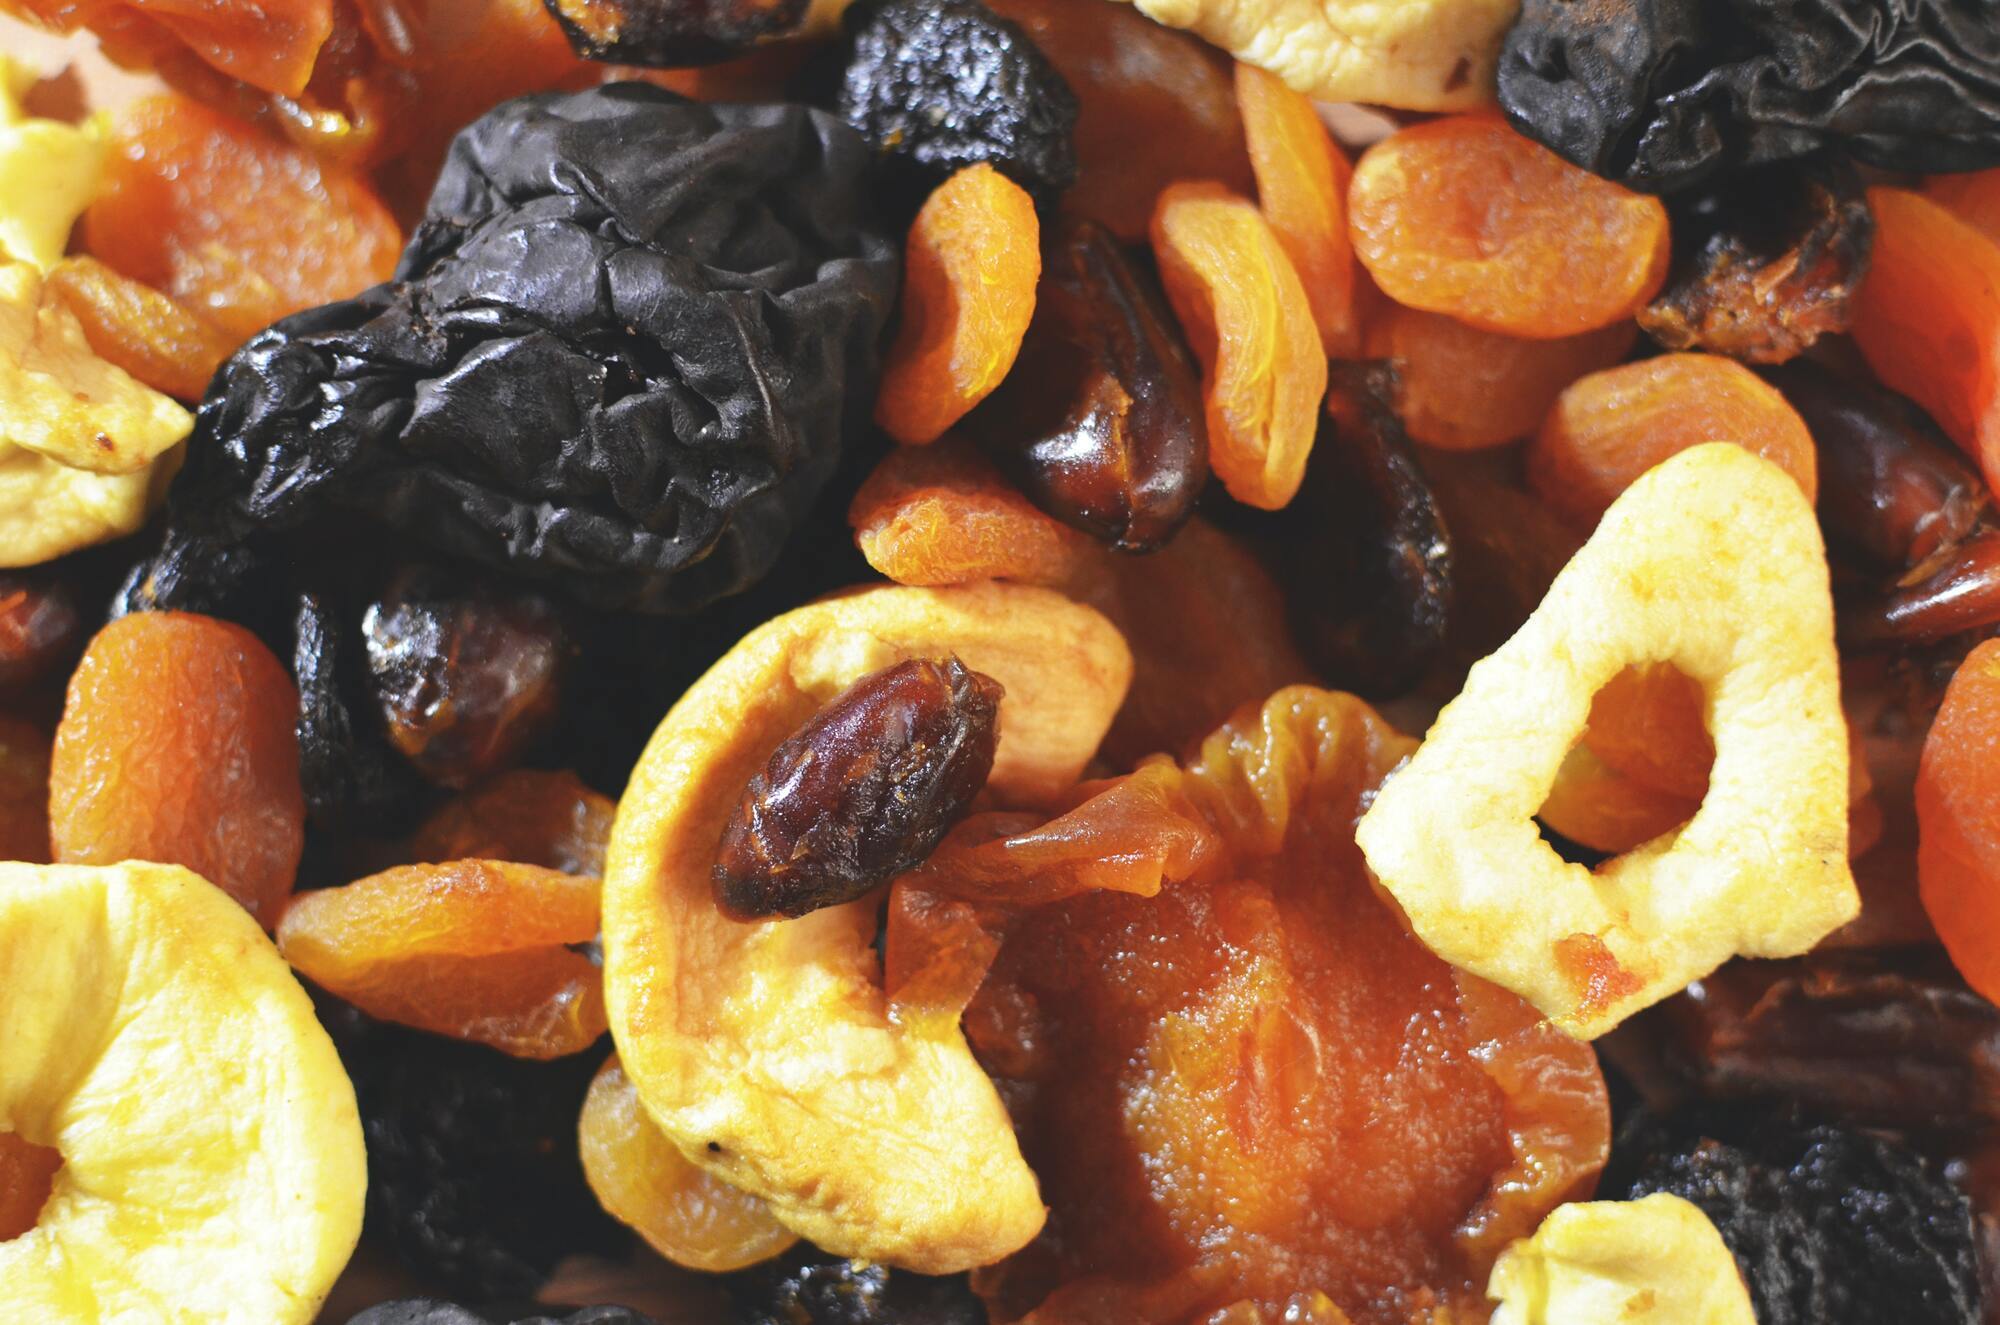 Dried fruits on a diet are not recommended to eat